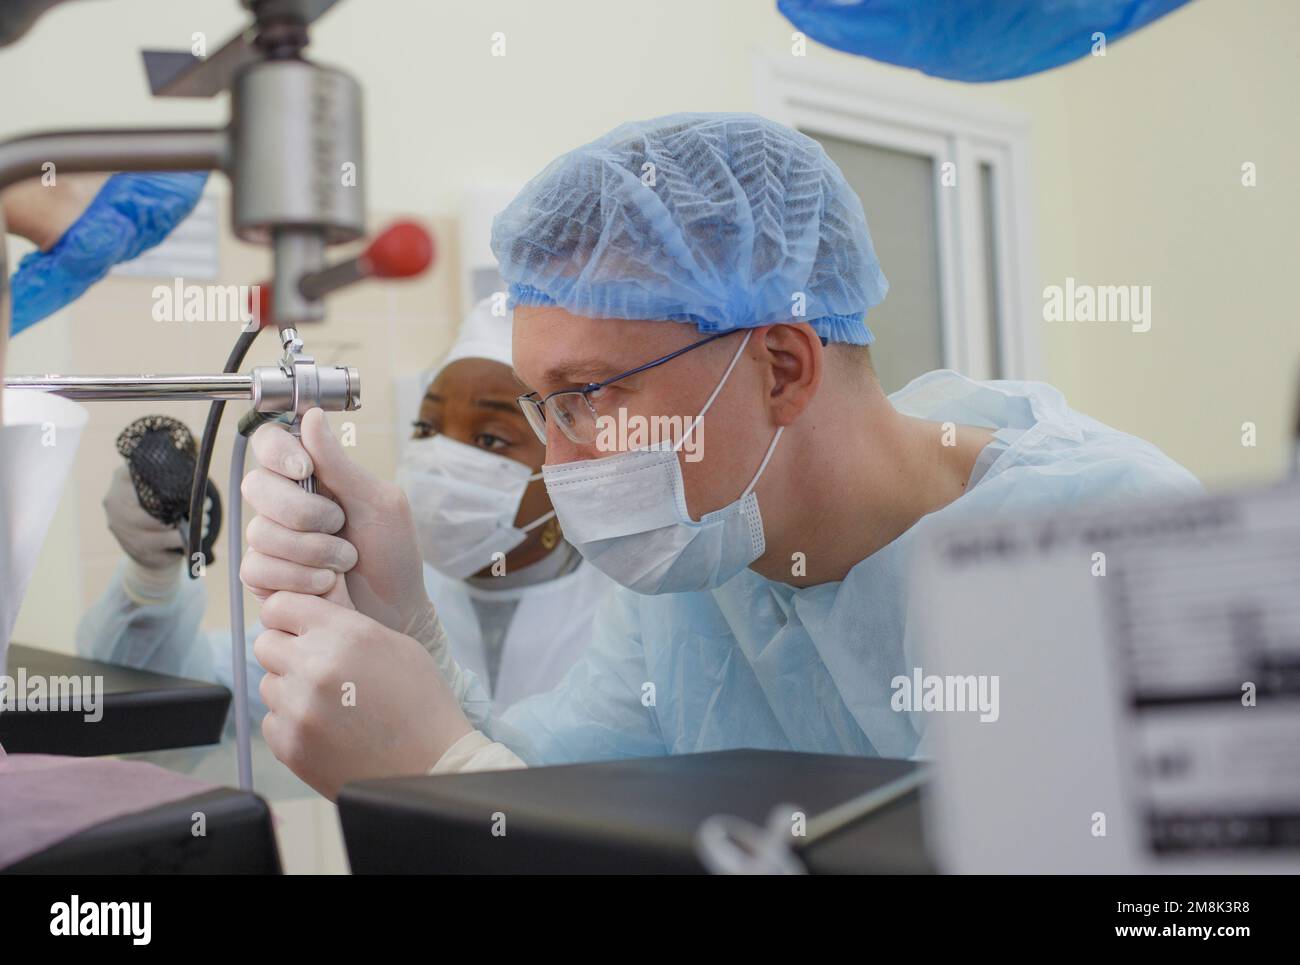 the doctor, together with an assistant, conducts a proctological medical examination of the patient in the treatment room. Stock Photo